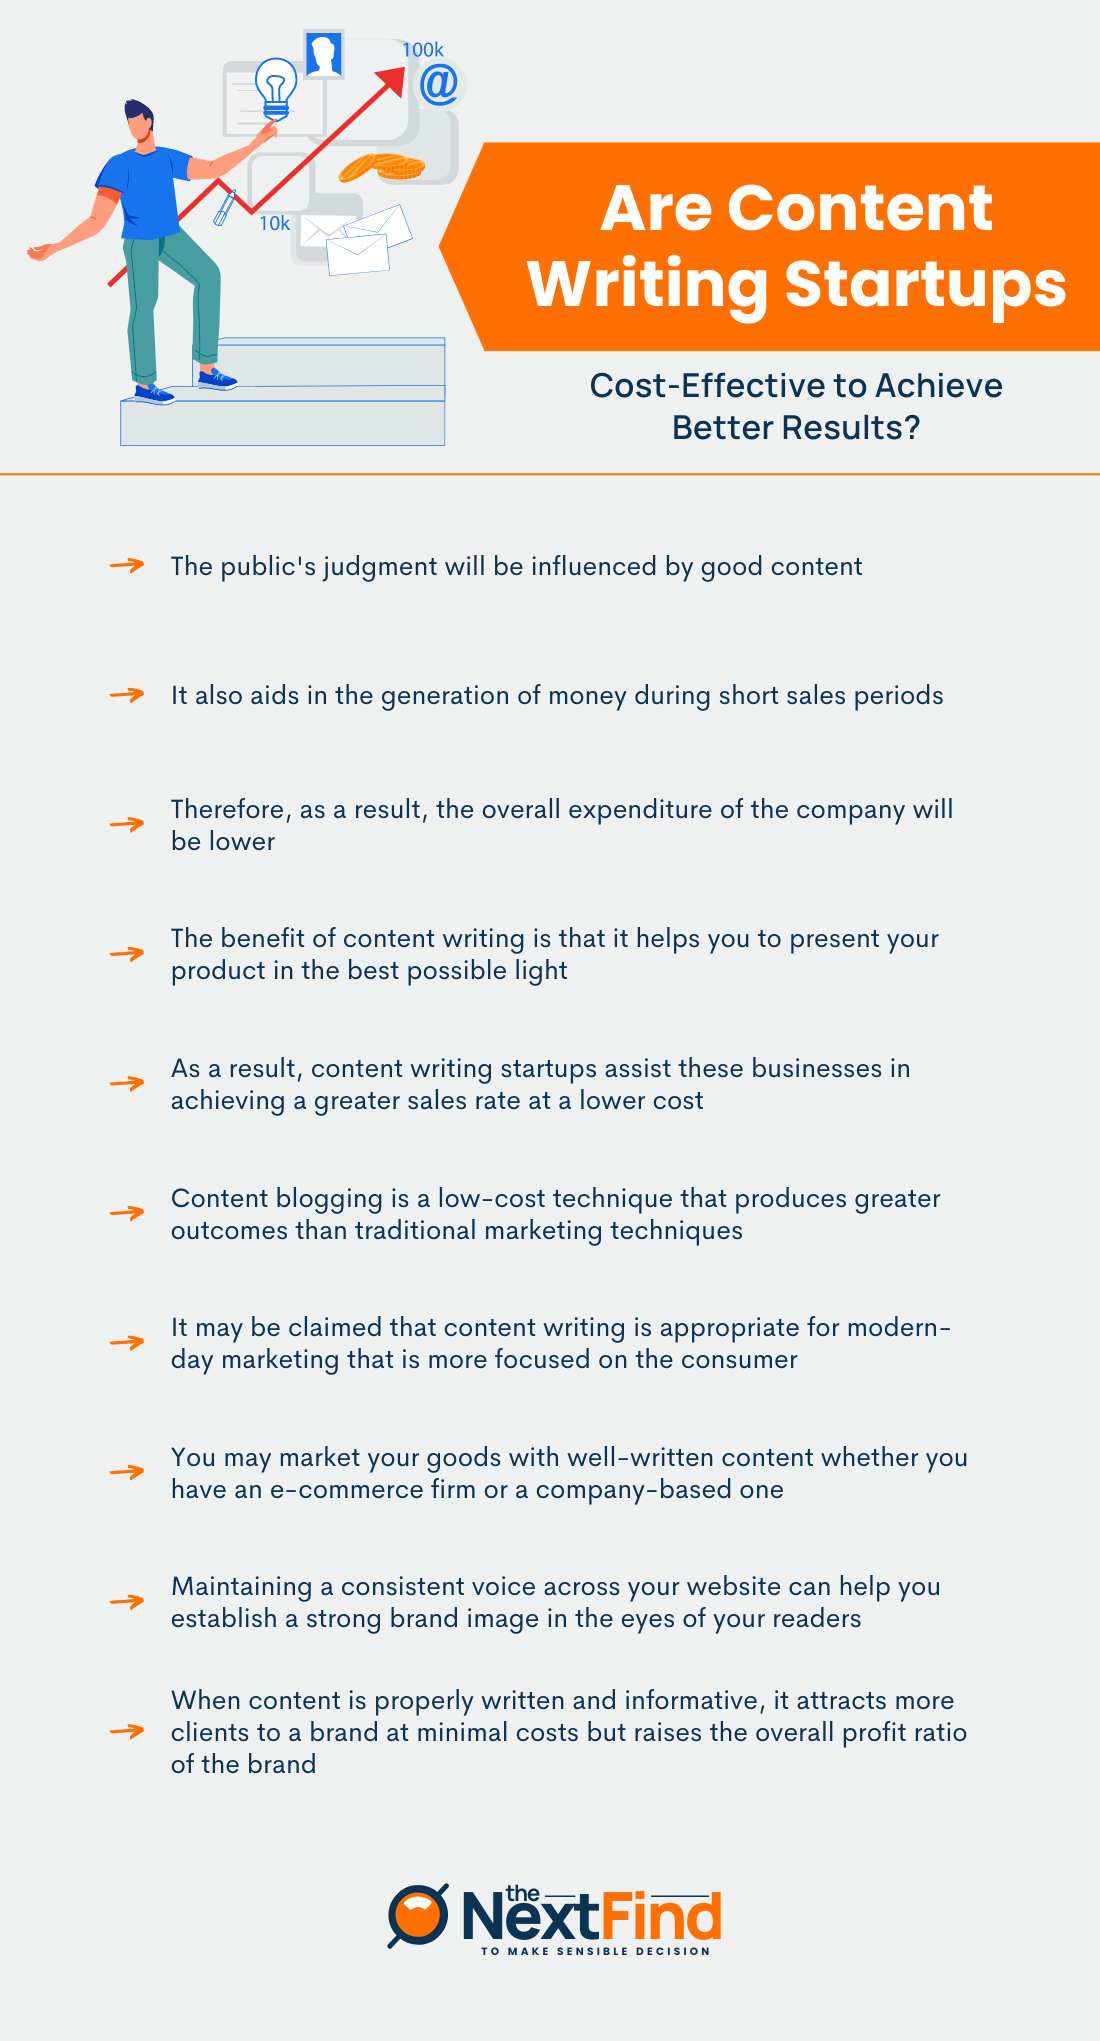 are content writing startups cost-effective to achieve better results